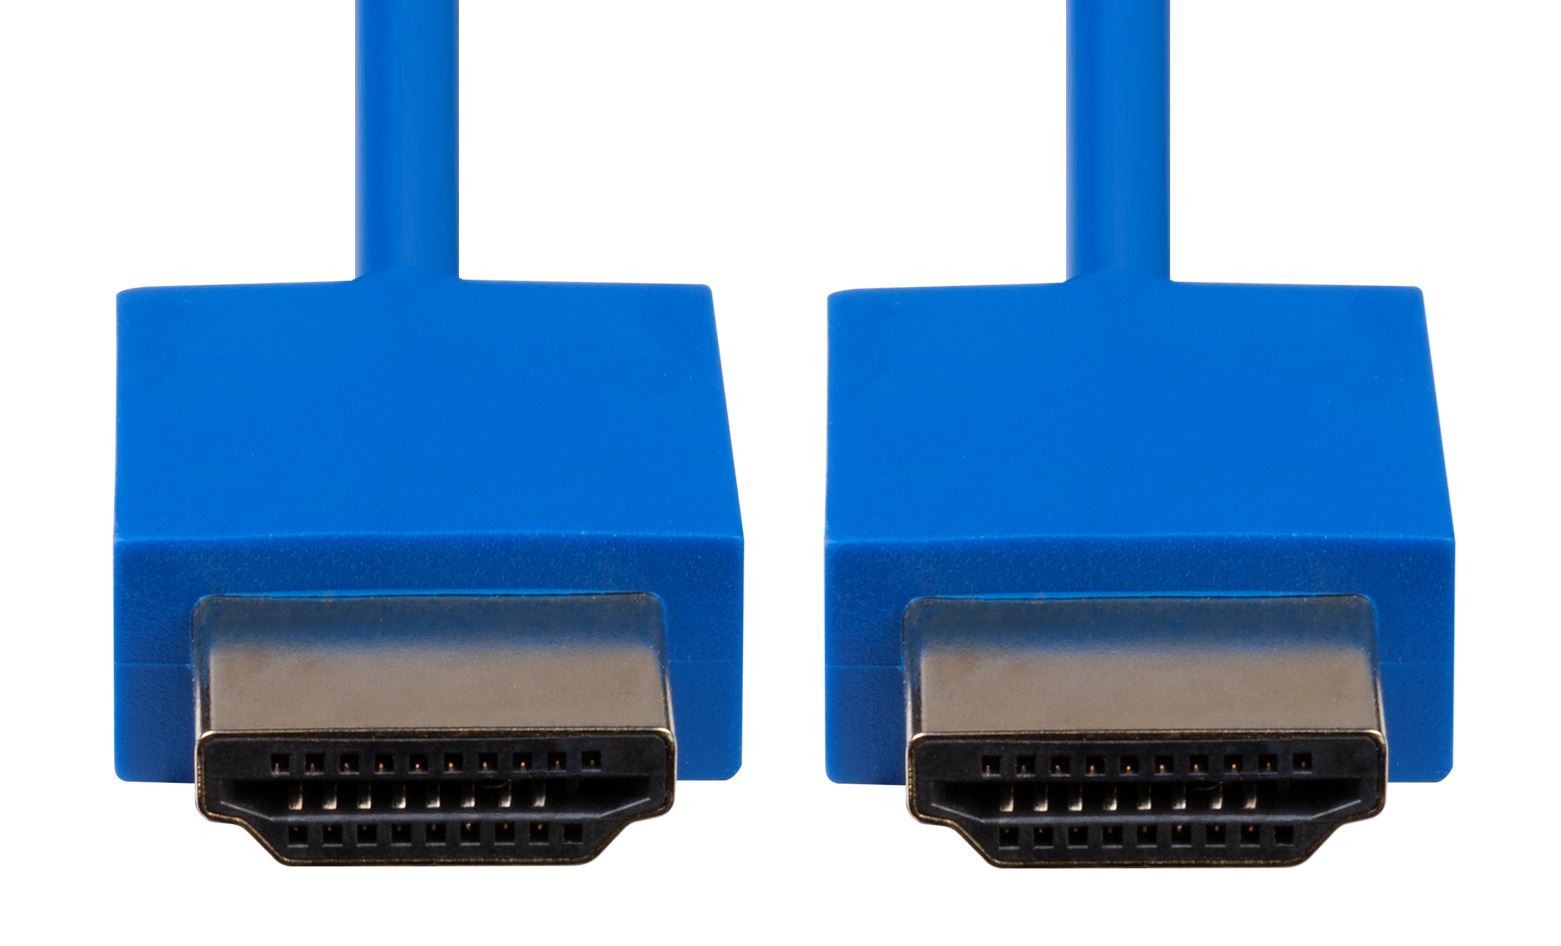 DYNAMIX_1.5M_HDMI_BLUE_Nano_High_Speed_With_Ethernet_Cable._Designed_for_UHD_Display_up_to_4K2K@60Hz._Slimline_Robust_Cable._Supports_CEC_2.0,_3D,_&_ARC._Supports_Up_to_32_Audio_Channels. 694